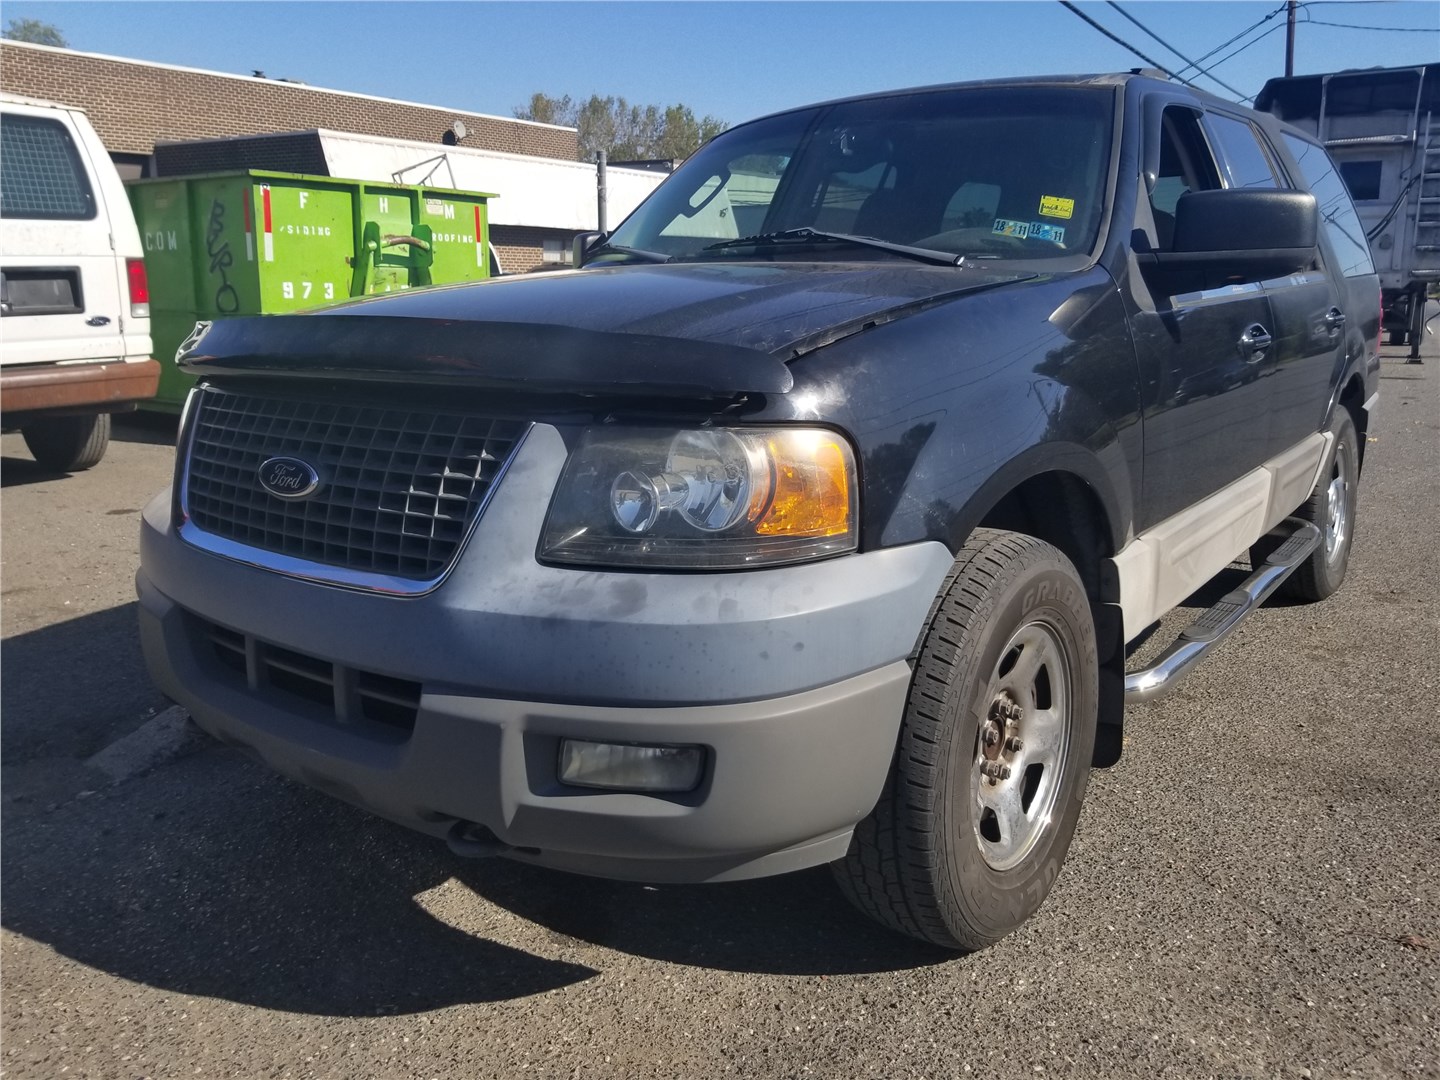 83120001041 Блок розжига Ford Expedition 2002-2006 2002